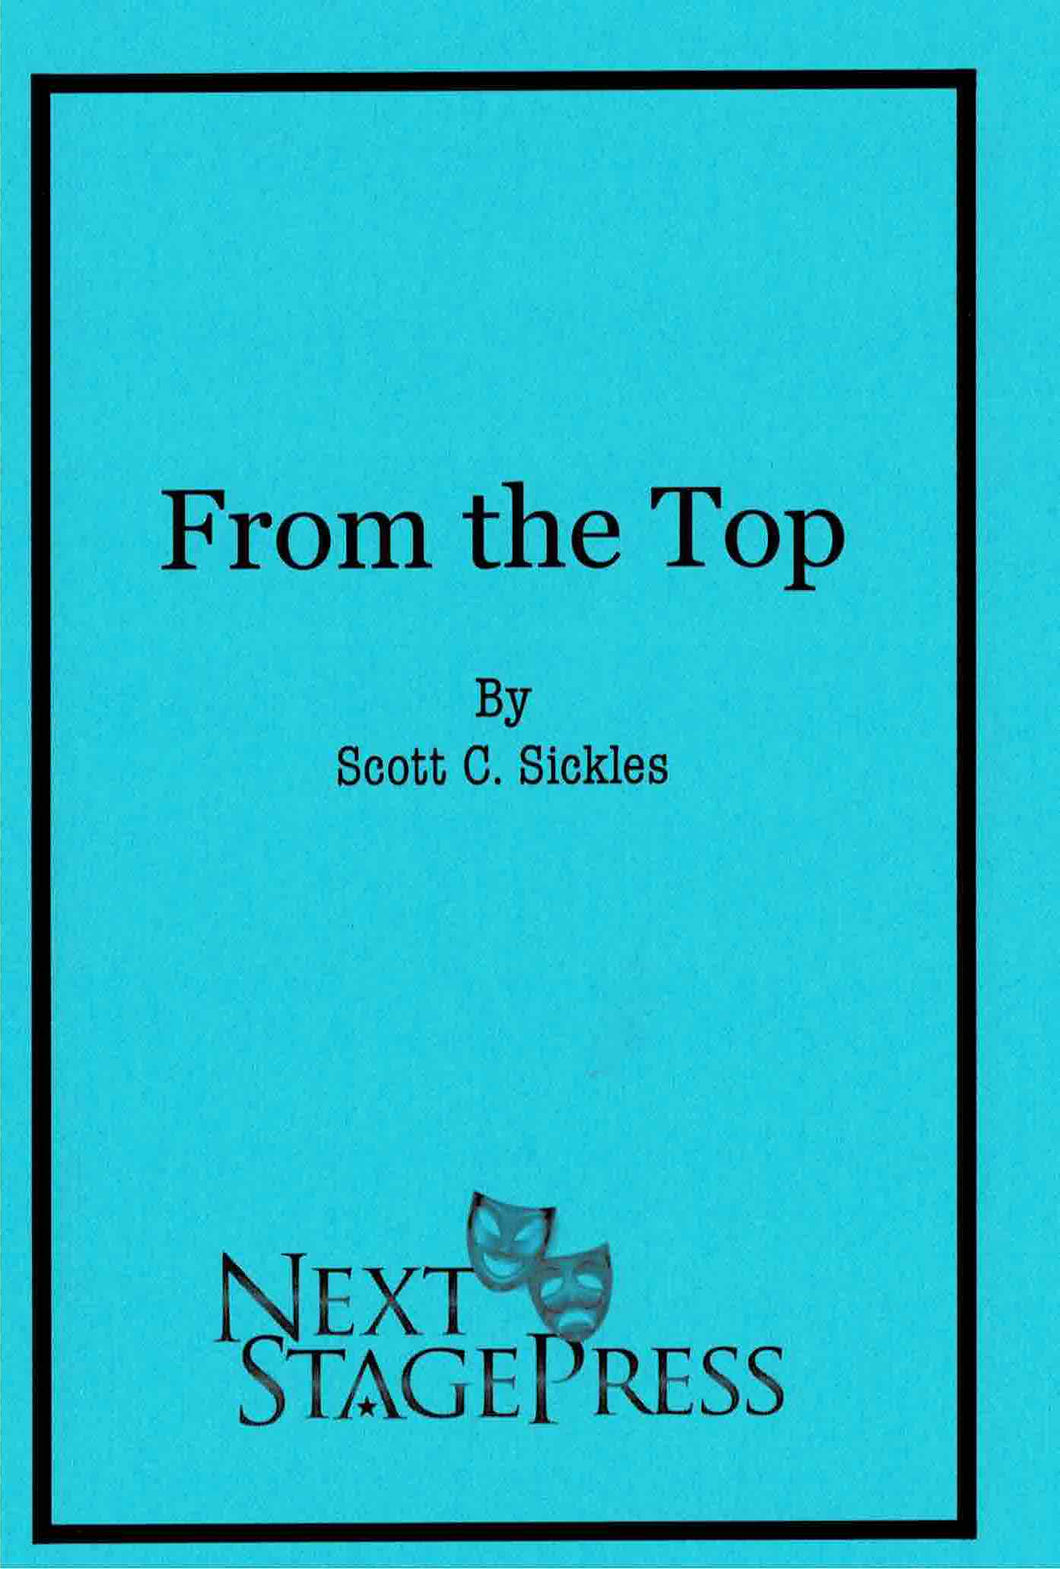 From the Top by Scott C. Sickles